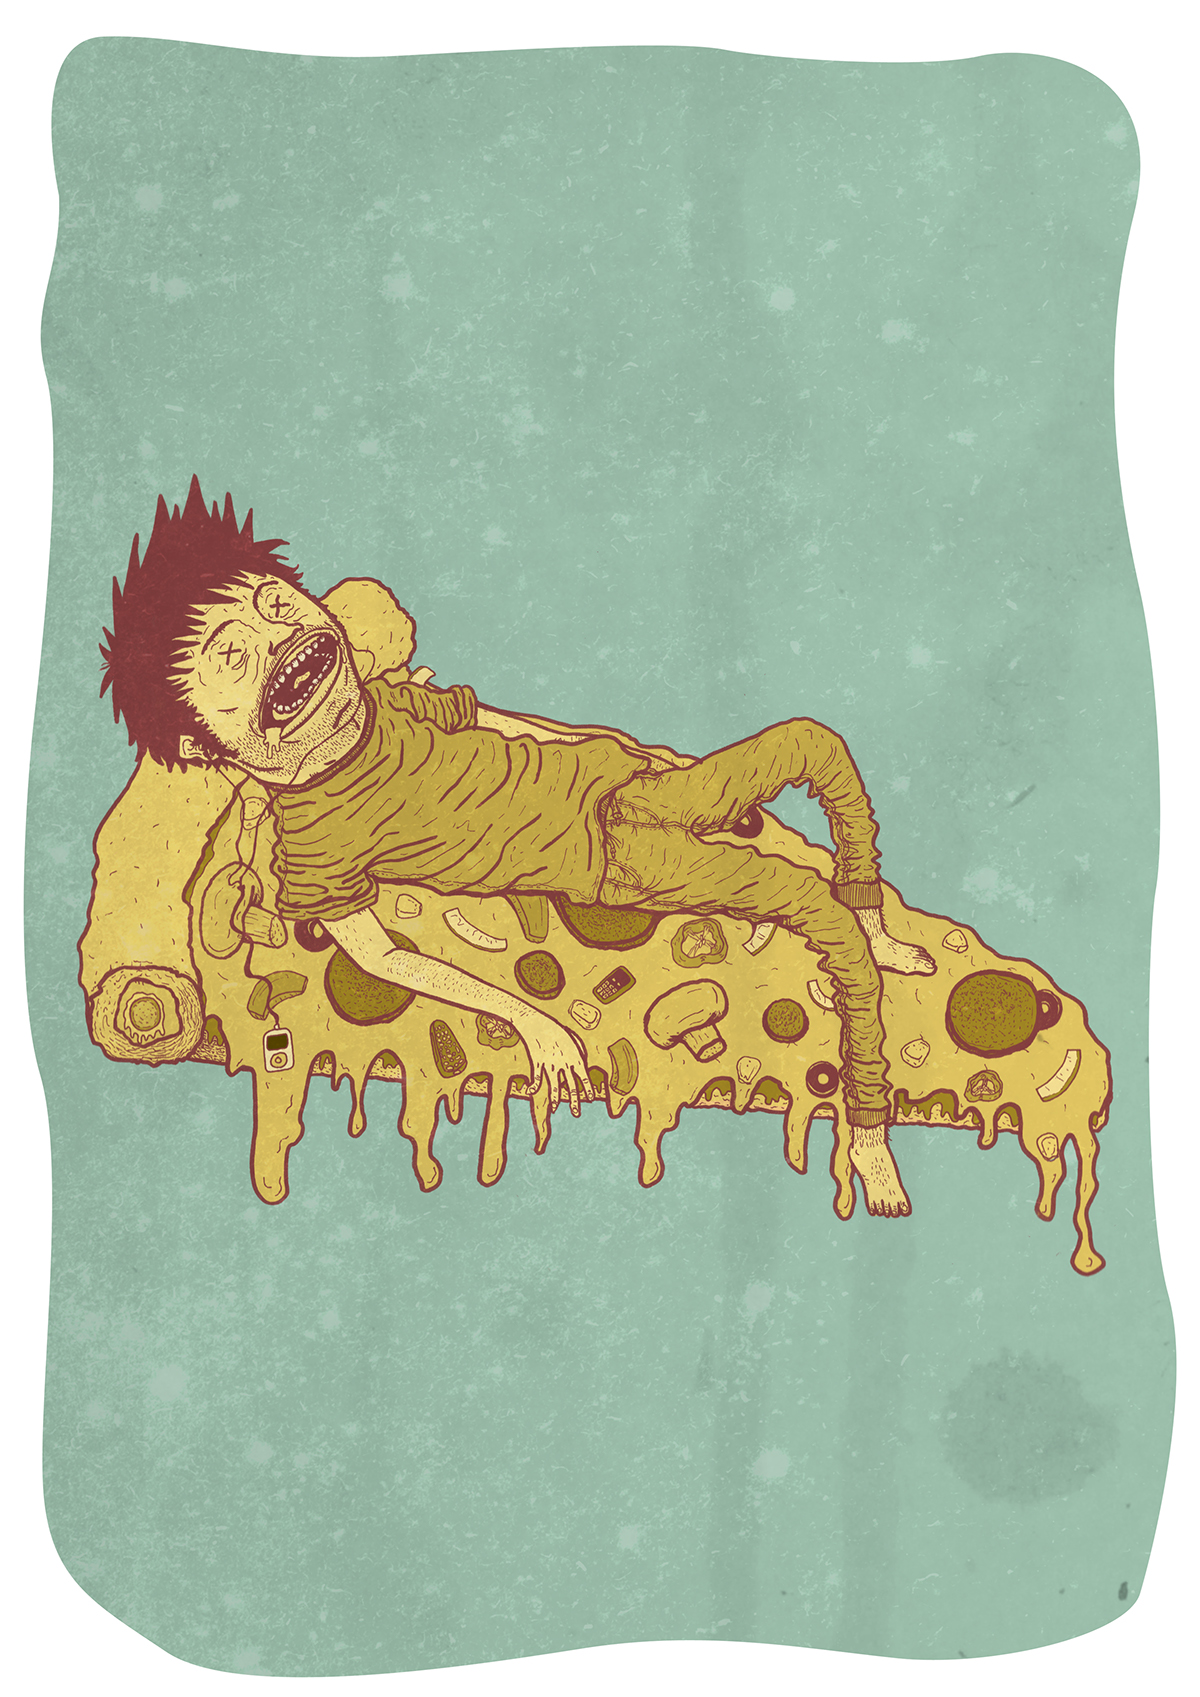 Pizza sliced hungover diced melting sleeping suffering dominoes Stuffed Crust poster digital print art Character tshirt